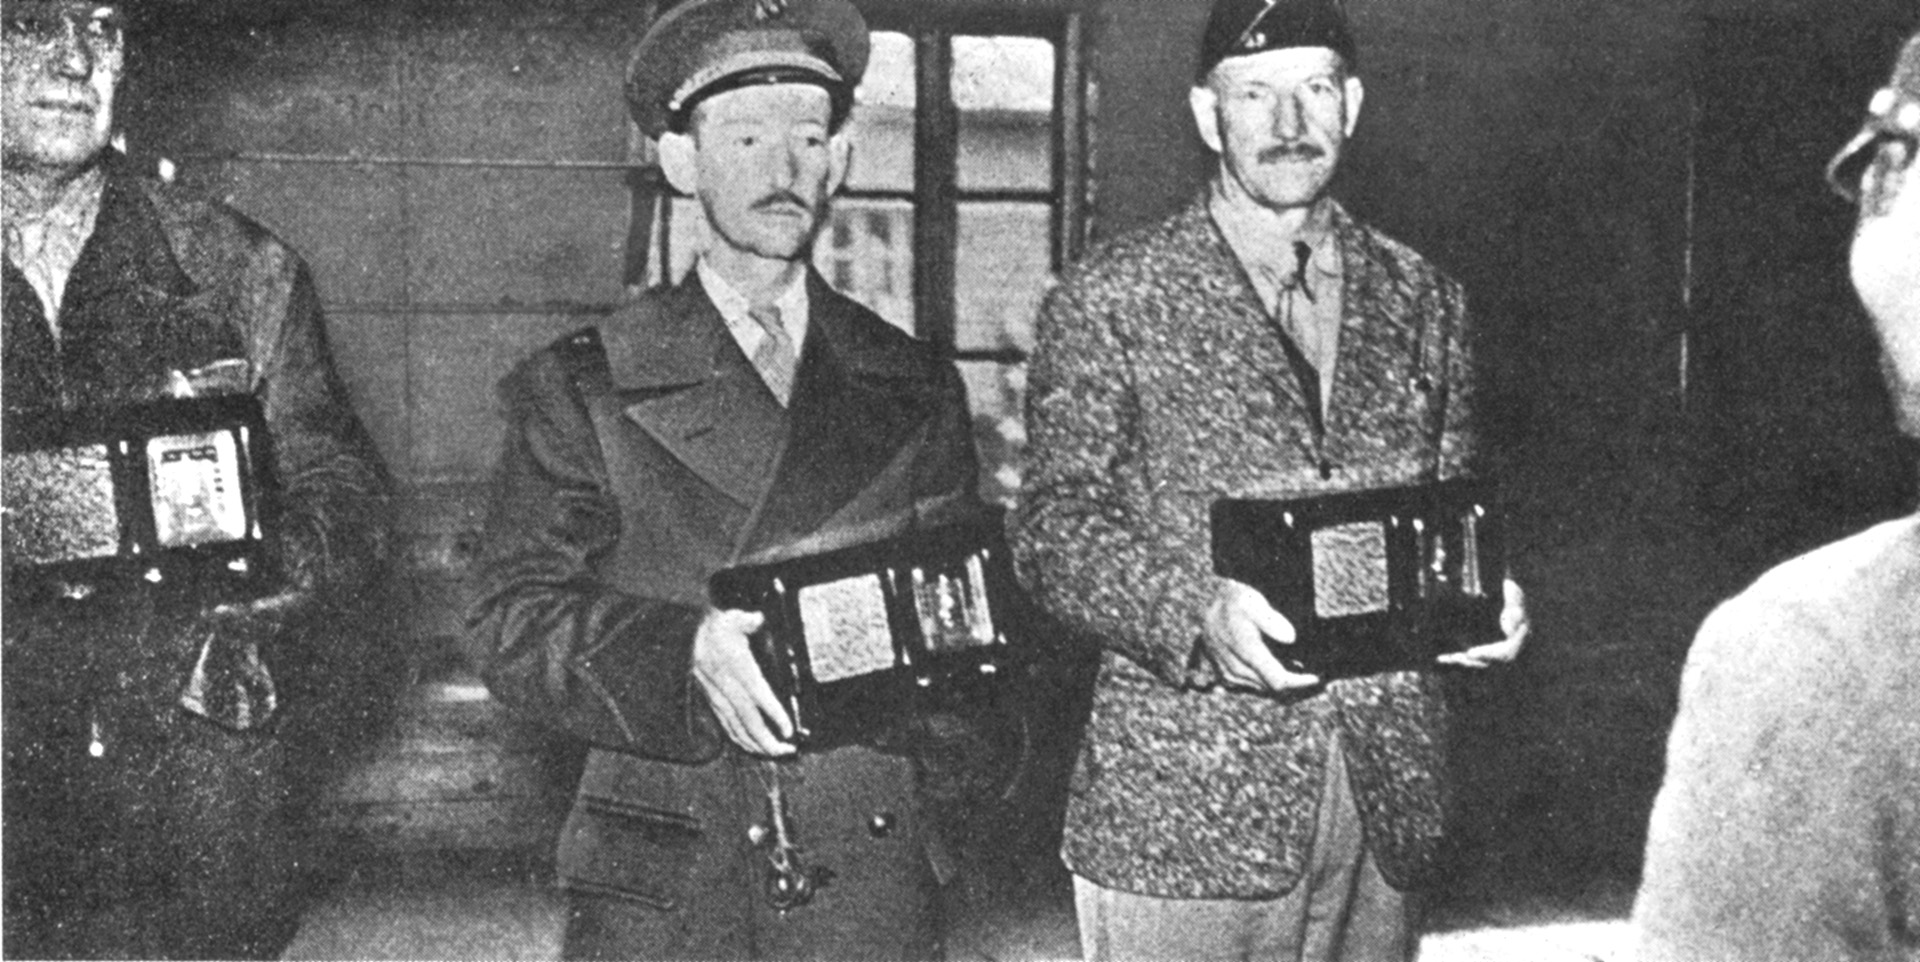 In captivity at Shanghai, Marine Major James P. Devereux (center), commander of the American garrison on Wake, poses with other prisoners. The radios were presented as a propaganda ploy and rigged to receive only Japanese broadcasts.